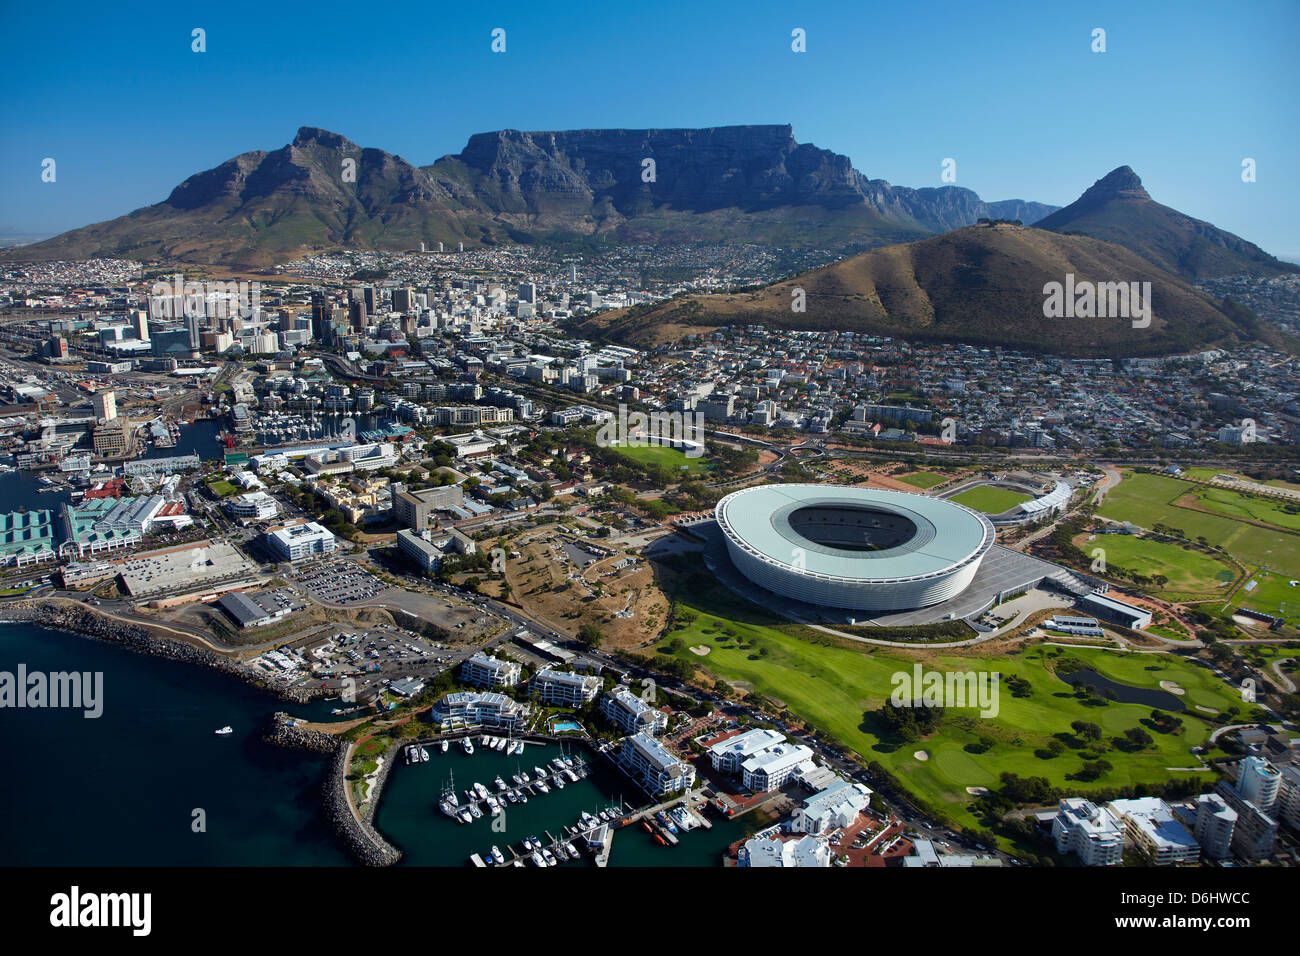 Cape Town Stadium, V & A Waterfront (links) und Tafelberg, Cape Town, South Africa - Antenne Stockfoto